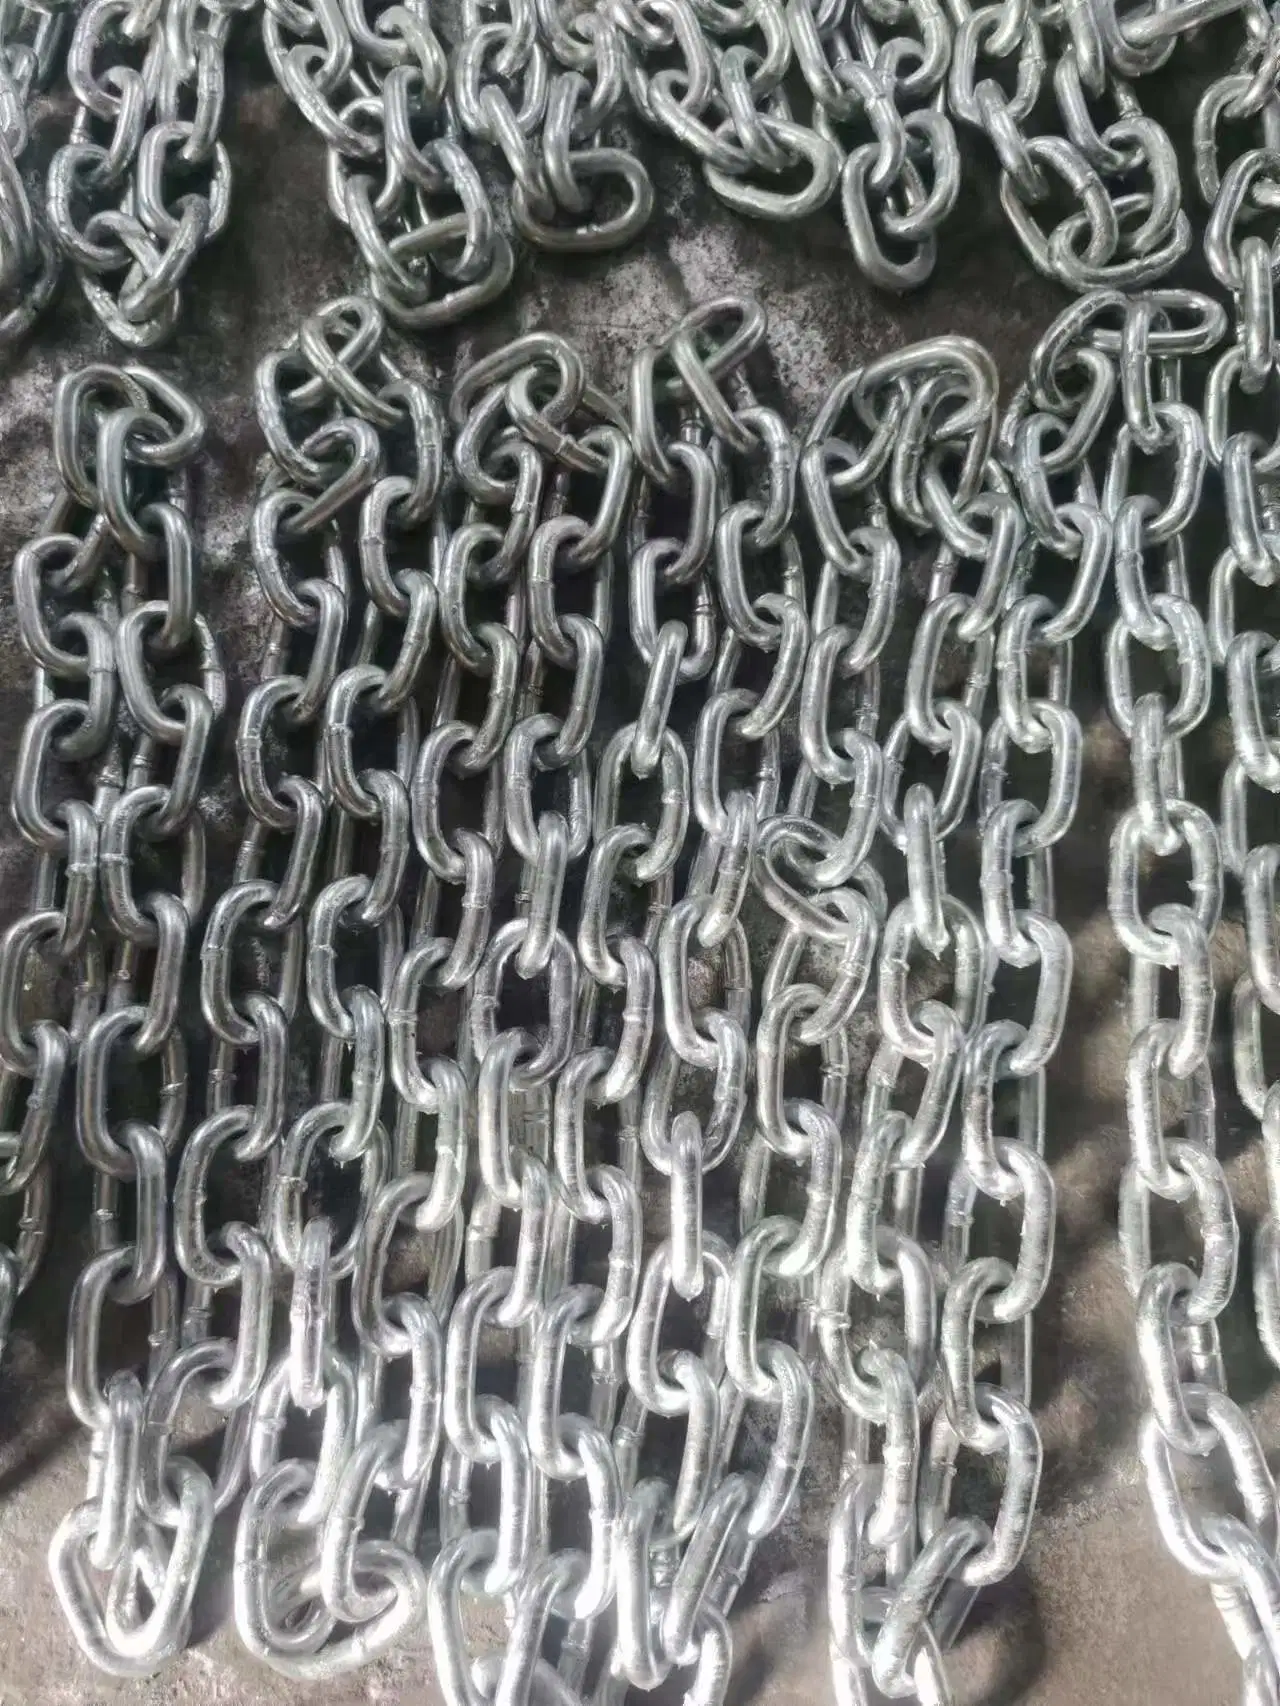 30 Years Chain Factory G80 Lashing Chain Hot DIP Galvanized 13*82/13*80/14*80mm 20mn2 Container Lashing, Port Dock Cargo Transport